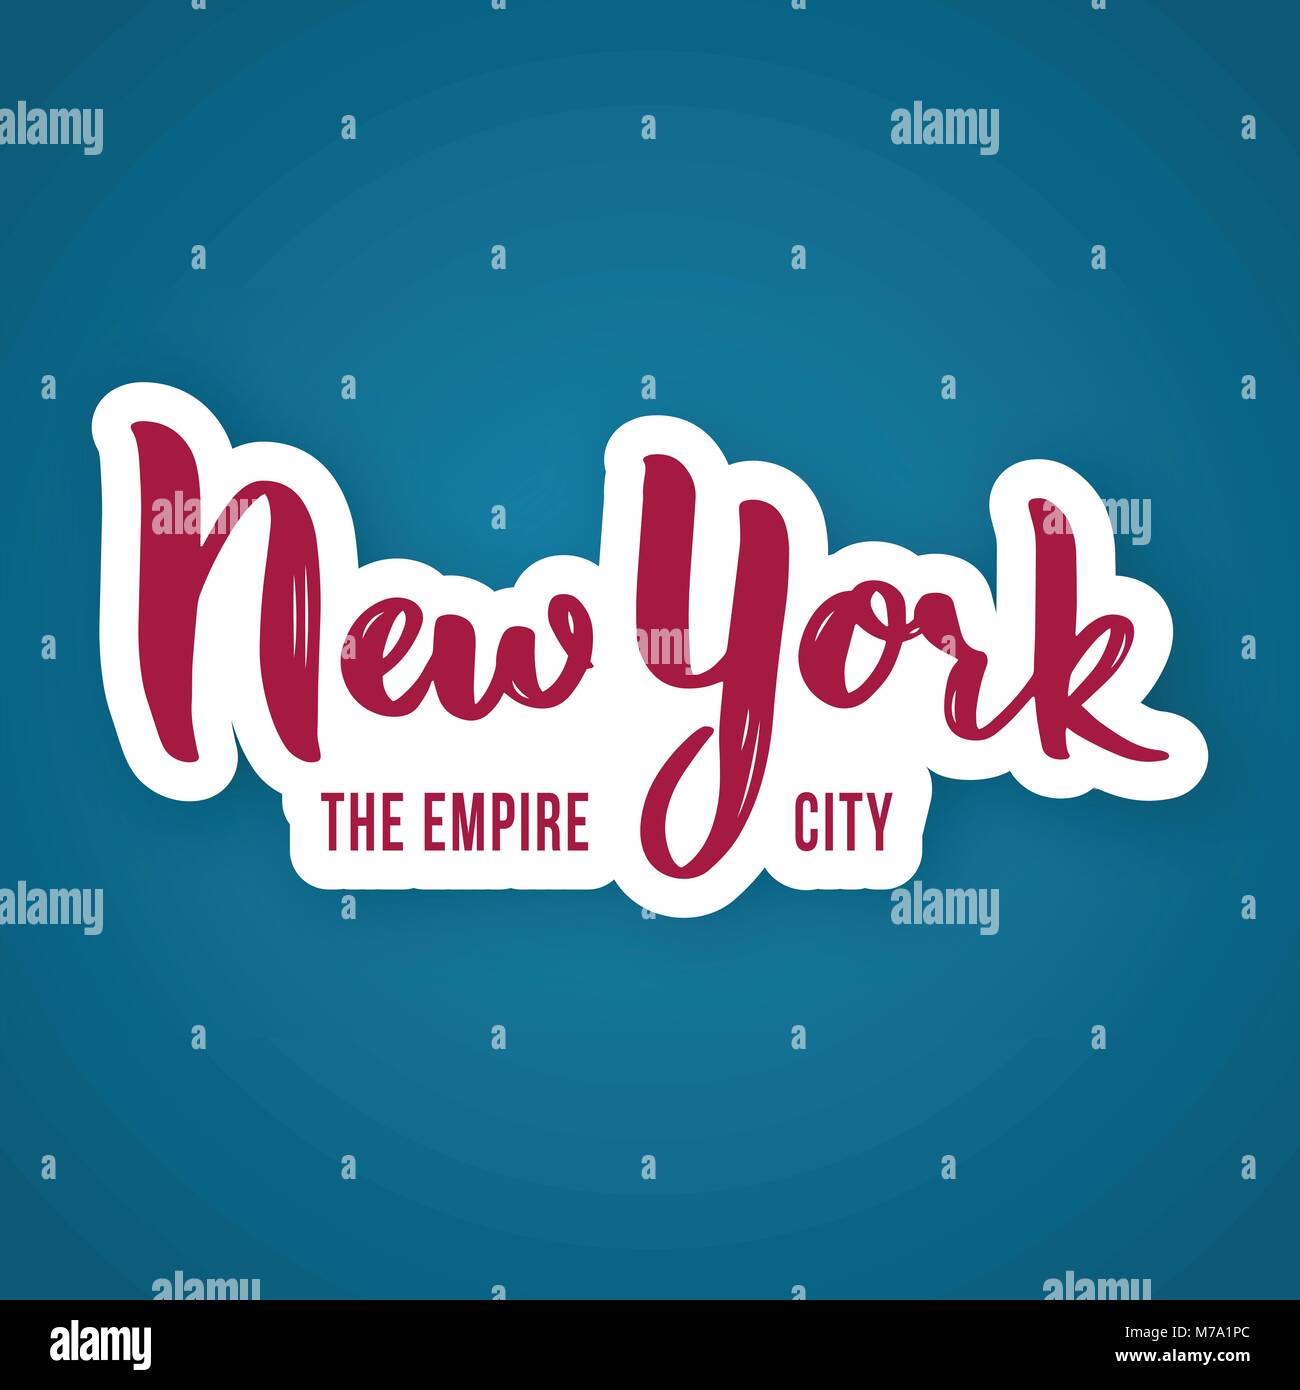 New york, the Empire City - hand drawn lettering phrase. Sticker made of paper with a shadow with text city. Vector illustration. Stock Vector